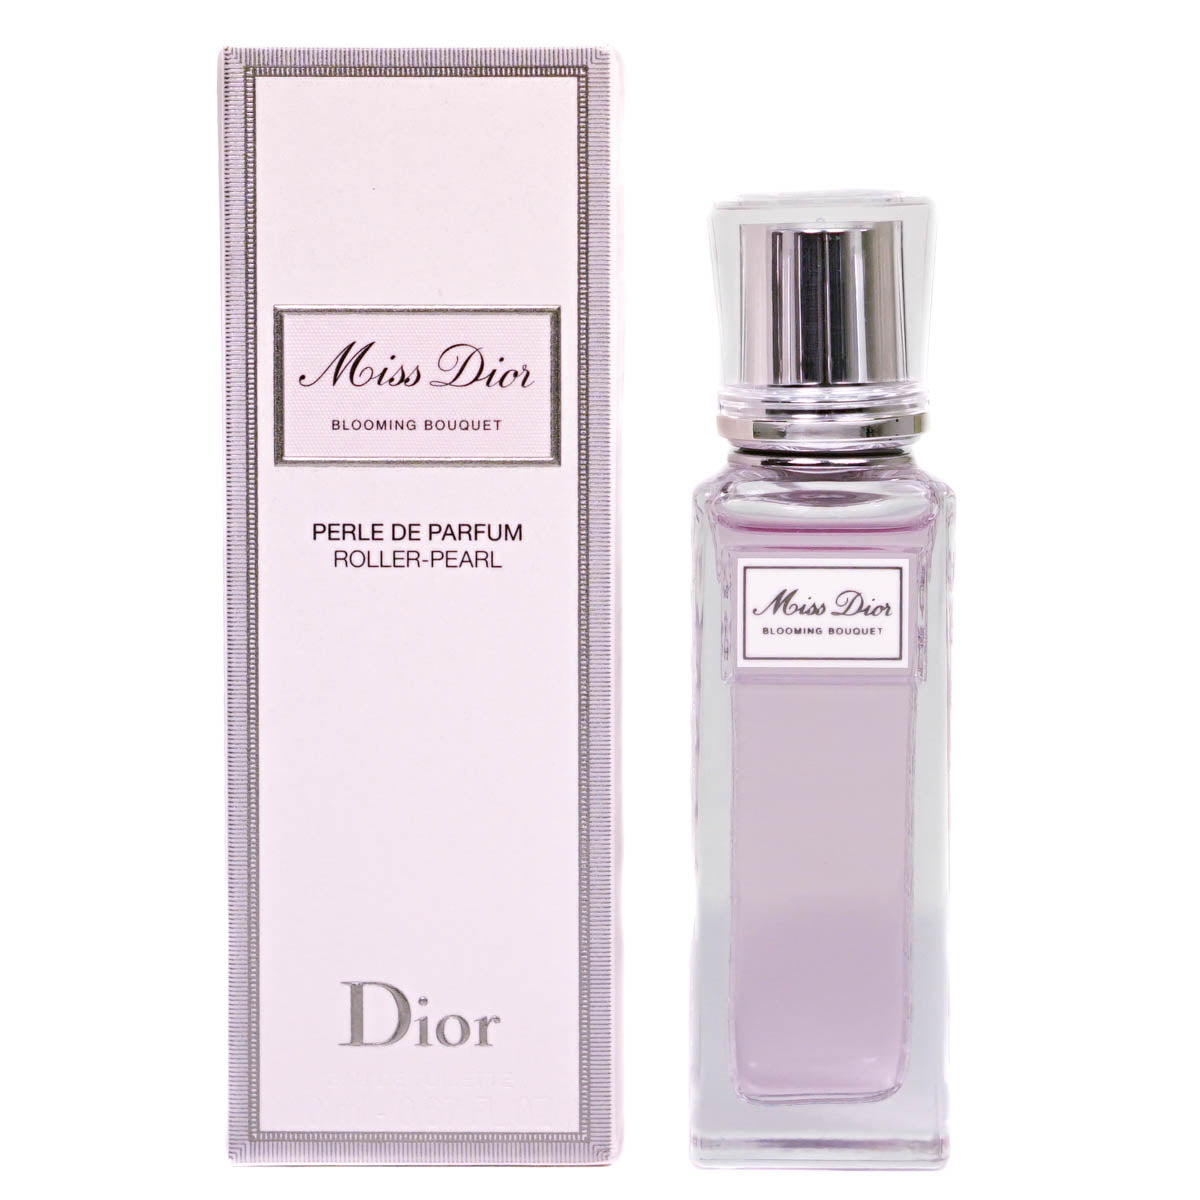 Dior Miss Dior Blooming Bouquet Roller Pearl 20ml